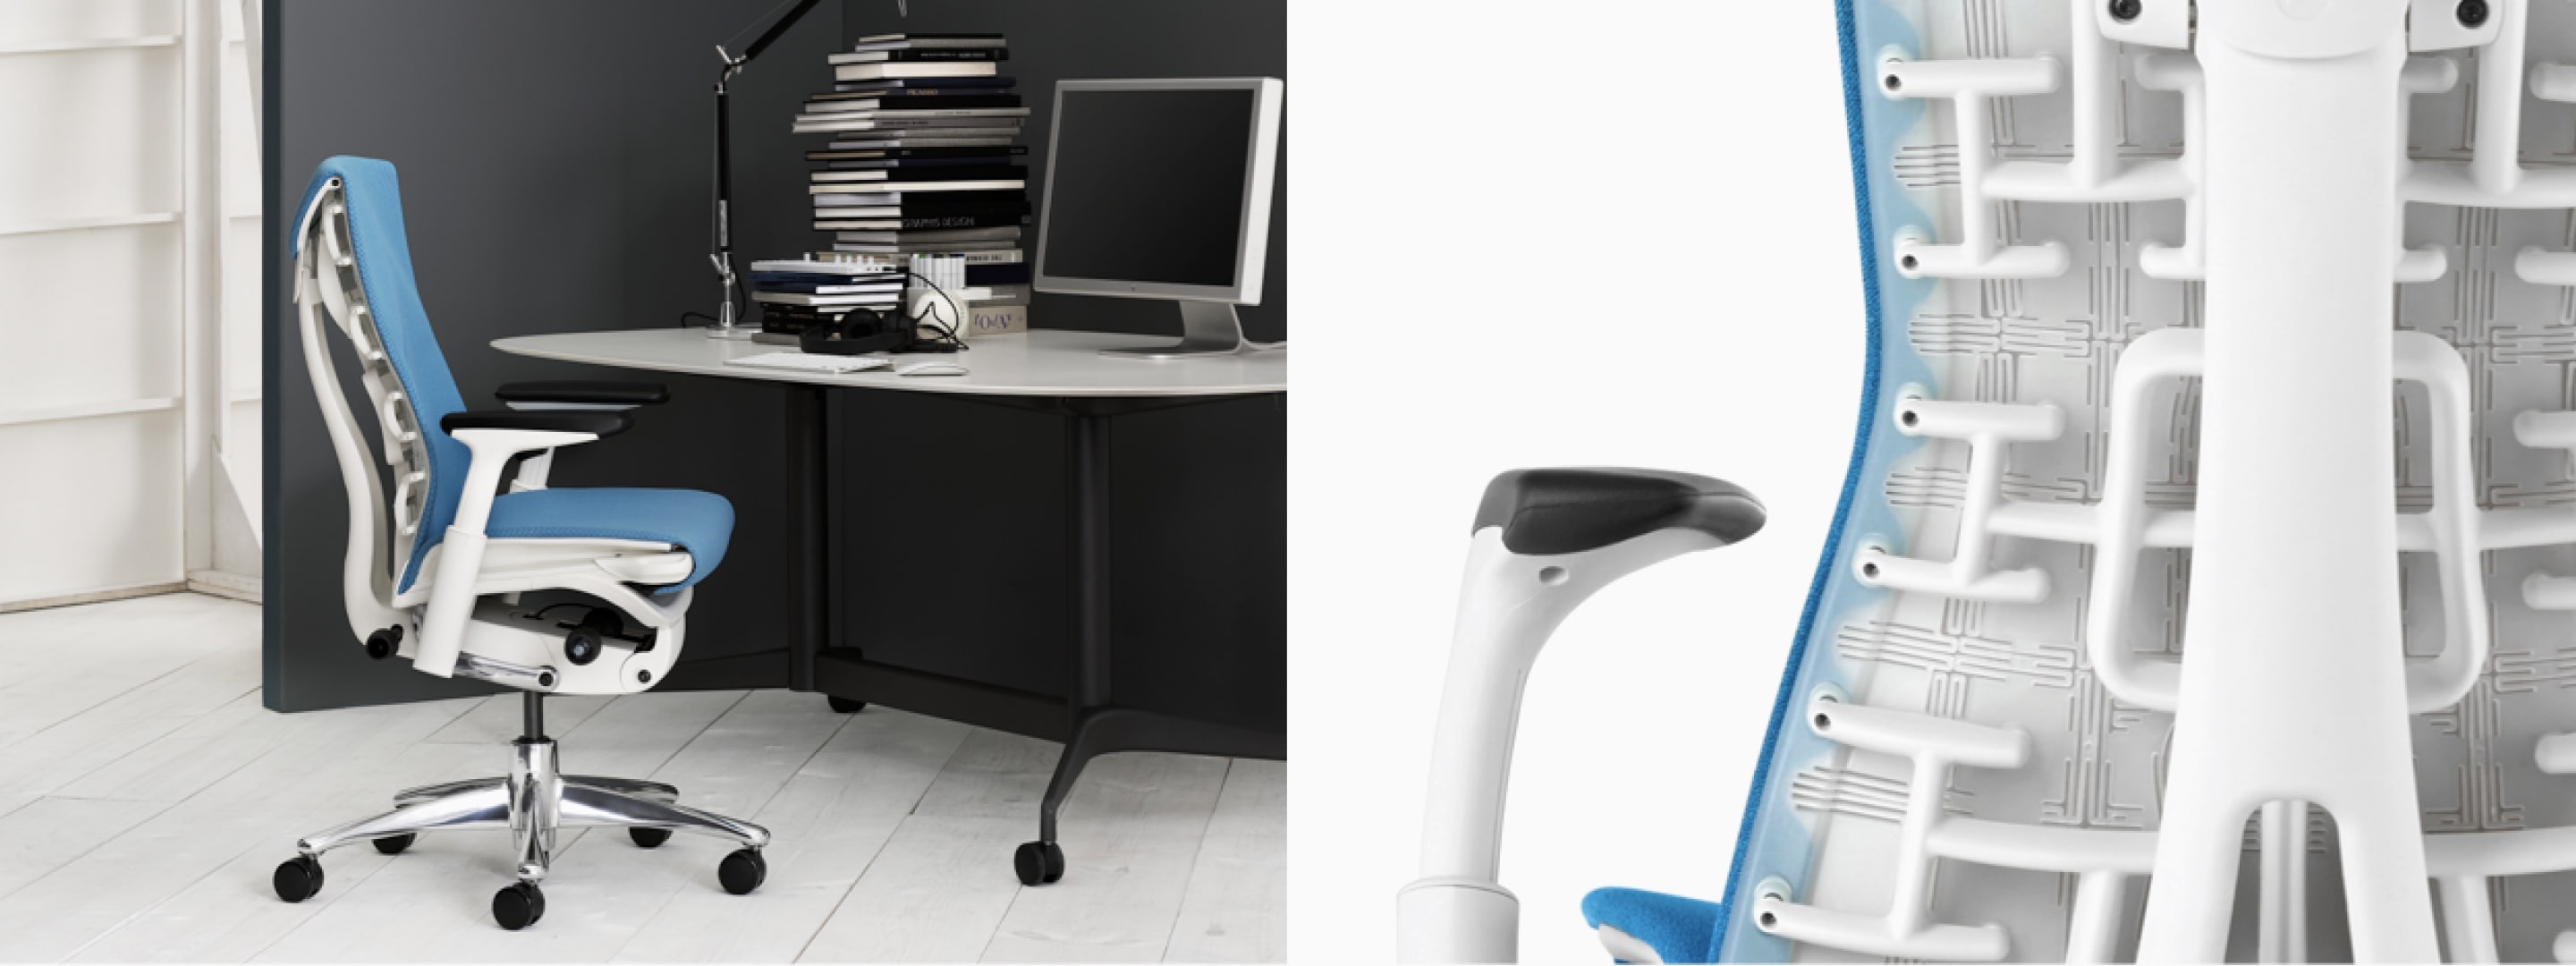 Two images of an Embody ergonomic office chair with white frame and blue upholstery, one with the chair at a desk, the other from behind.